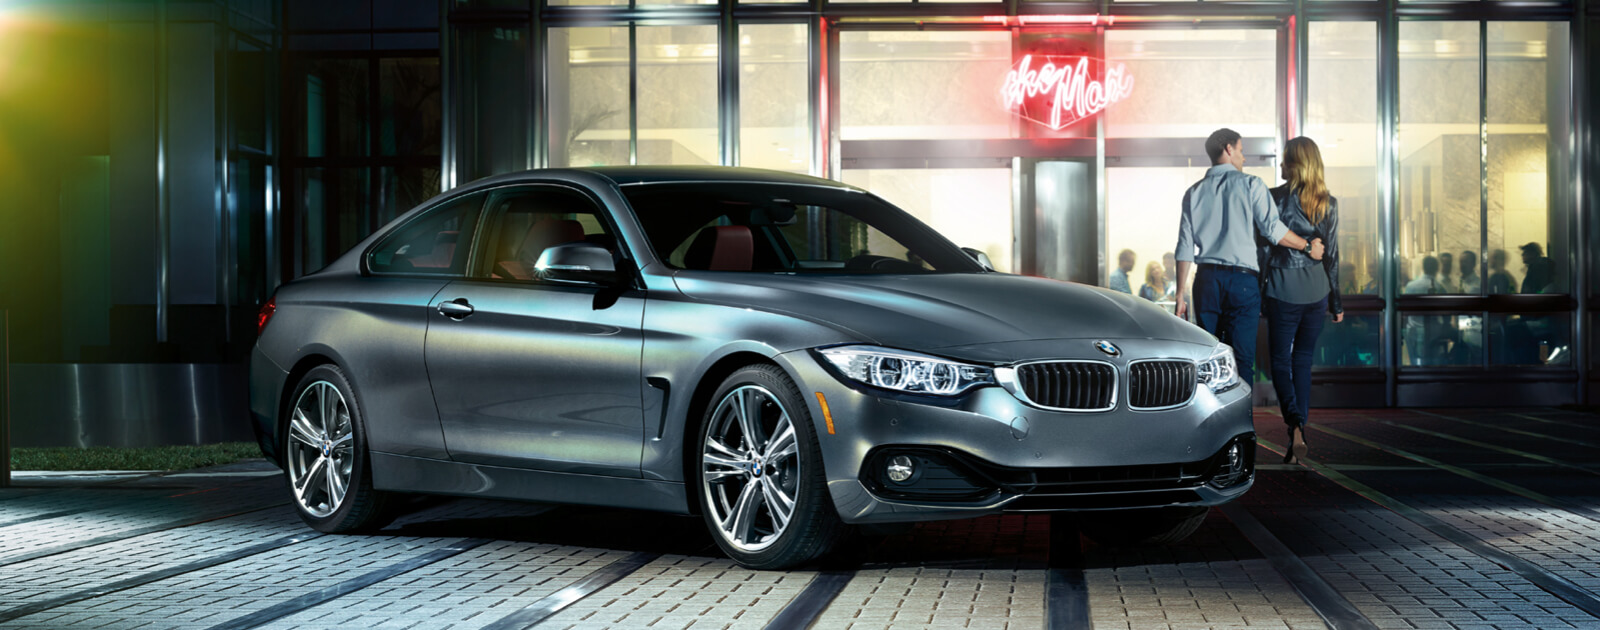 BMW 4 Series Car Review: Style, Power and Elegance